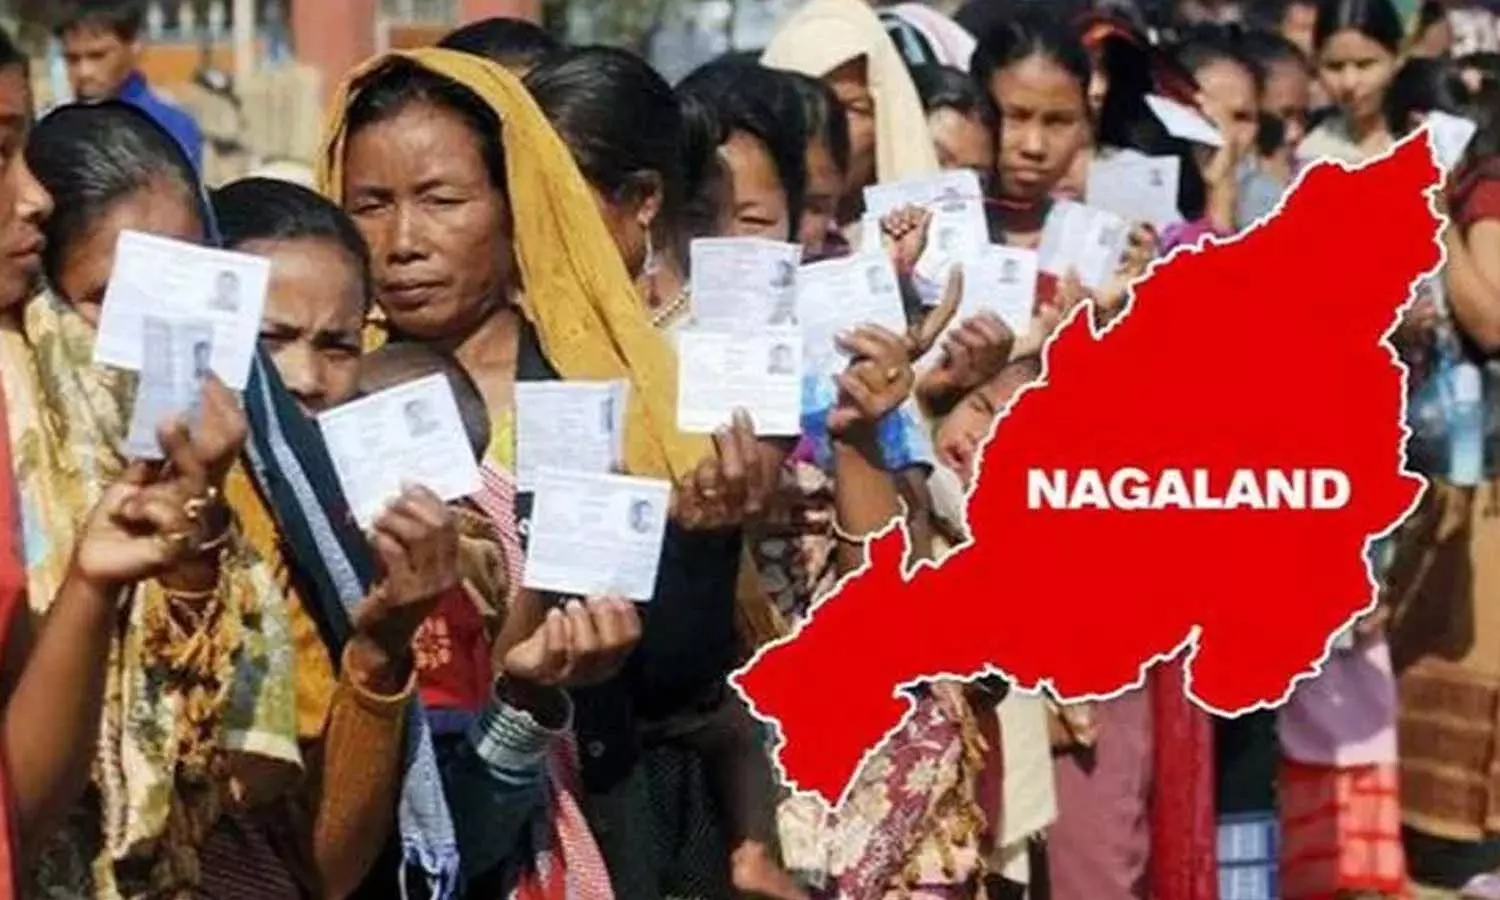 There is no opposition left in Nagaland, everyone including NCP supports the NDPP-BJP coalition government: